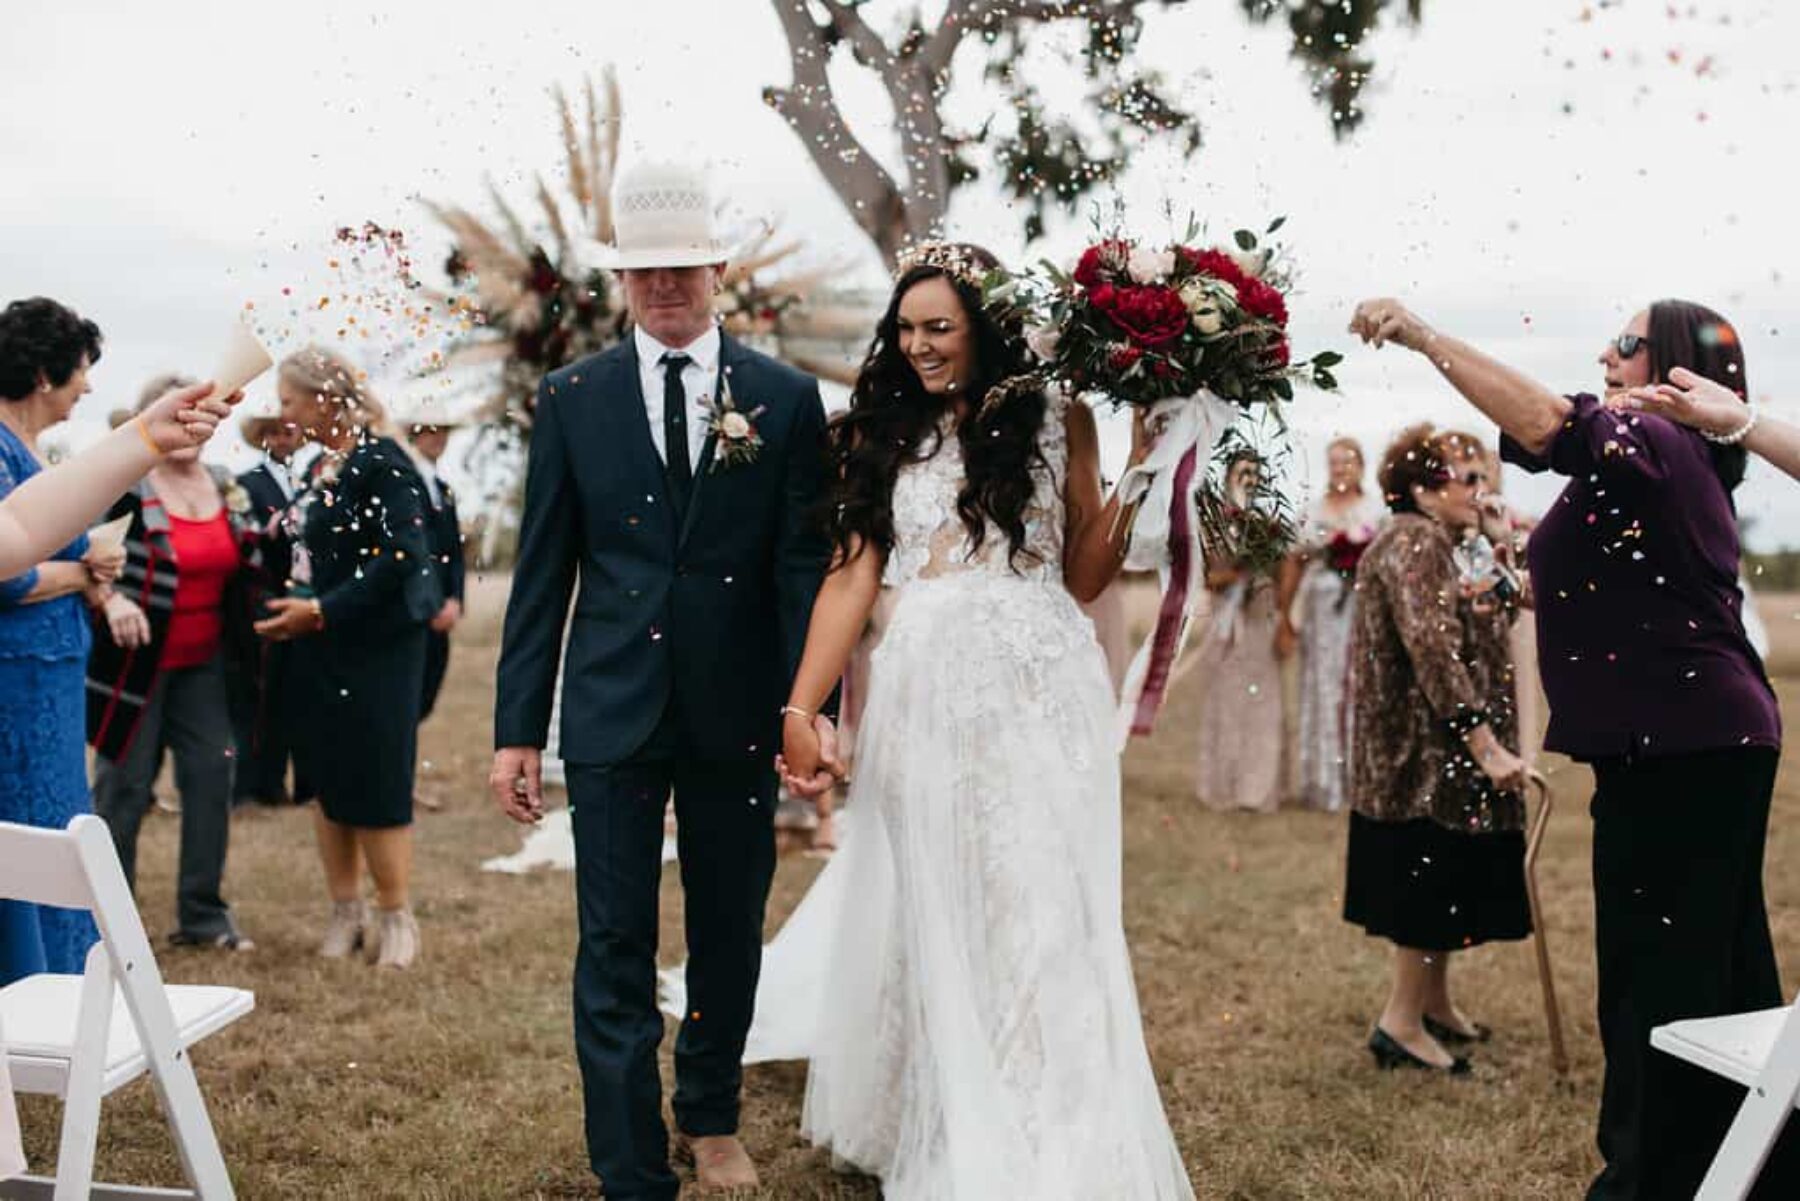 Glam cattle station wedding, Townsville QLD - Photography by SB Creative Co